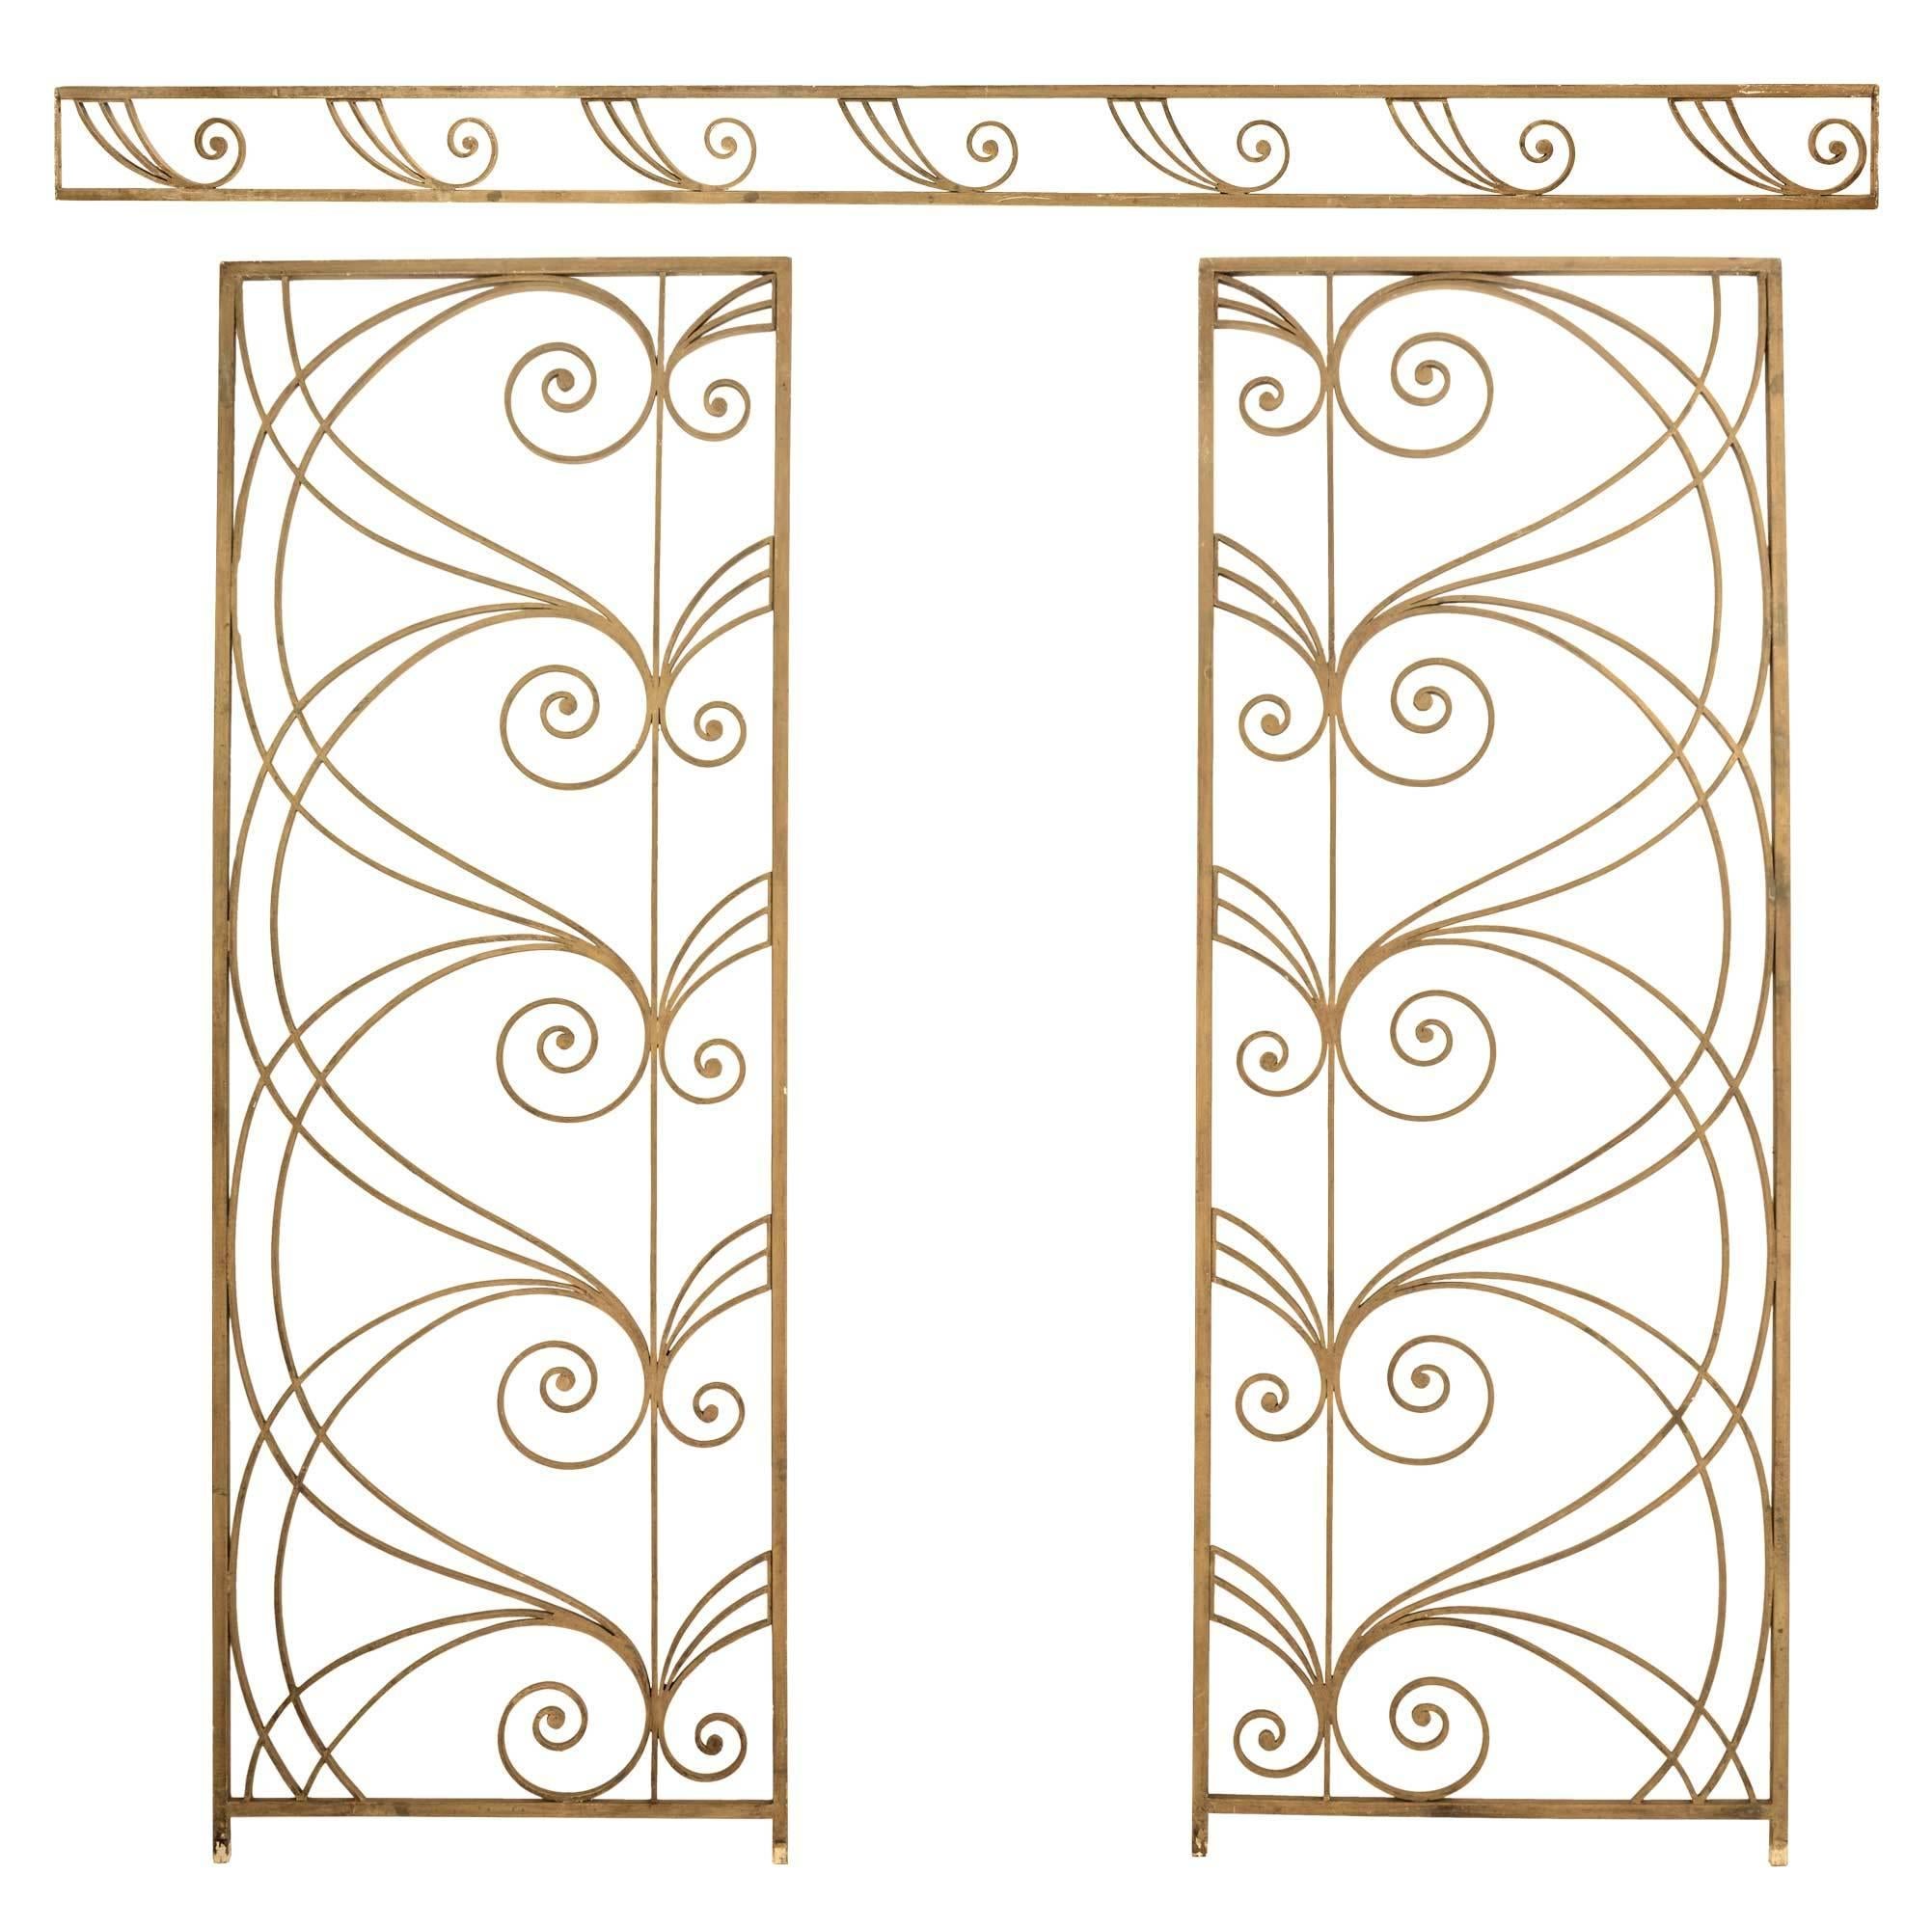 American Gold Painted Iron Room Divider with Scrolls